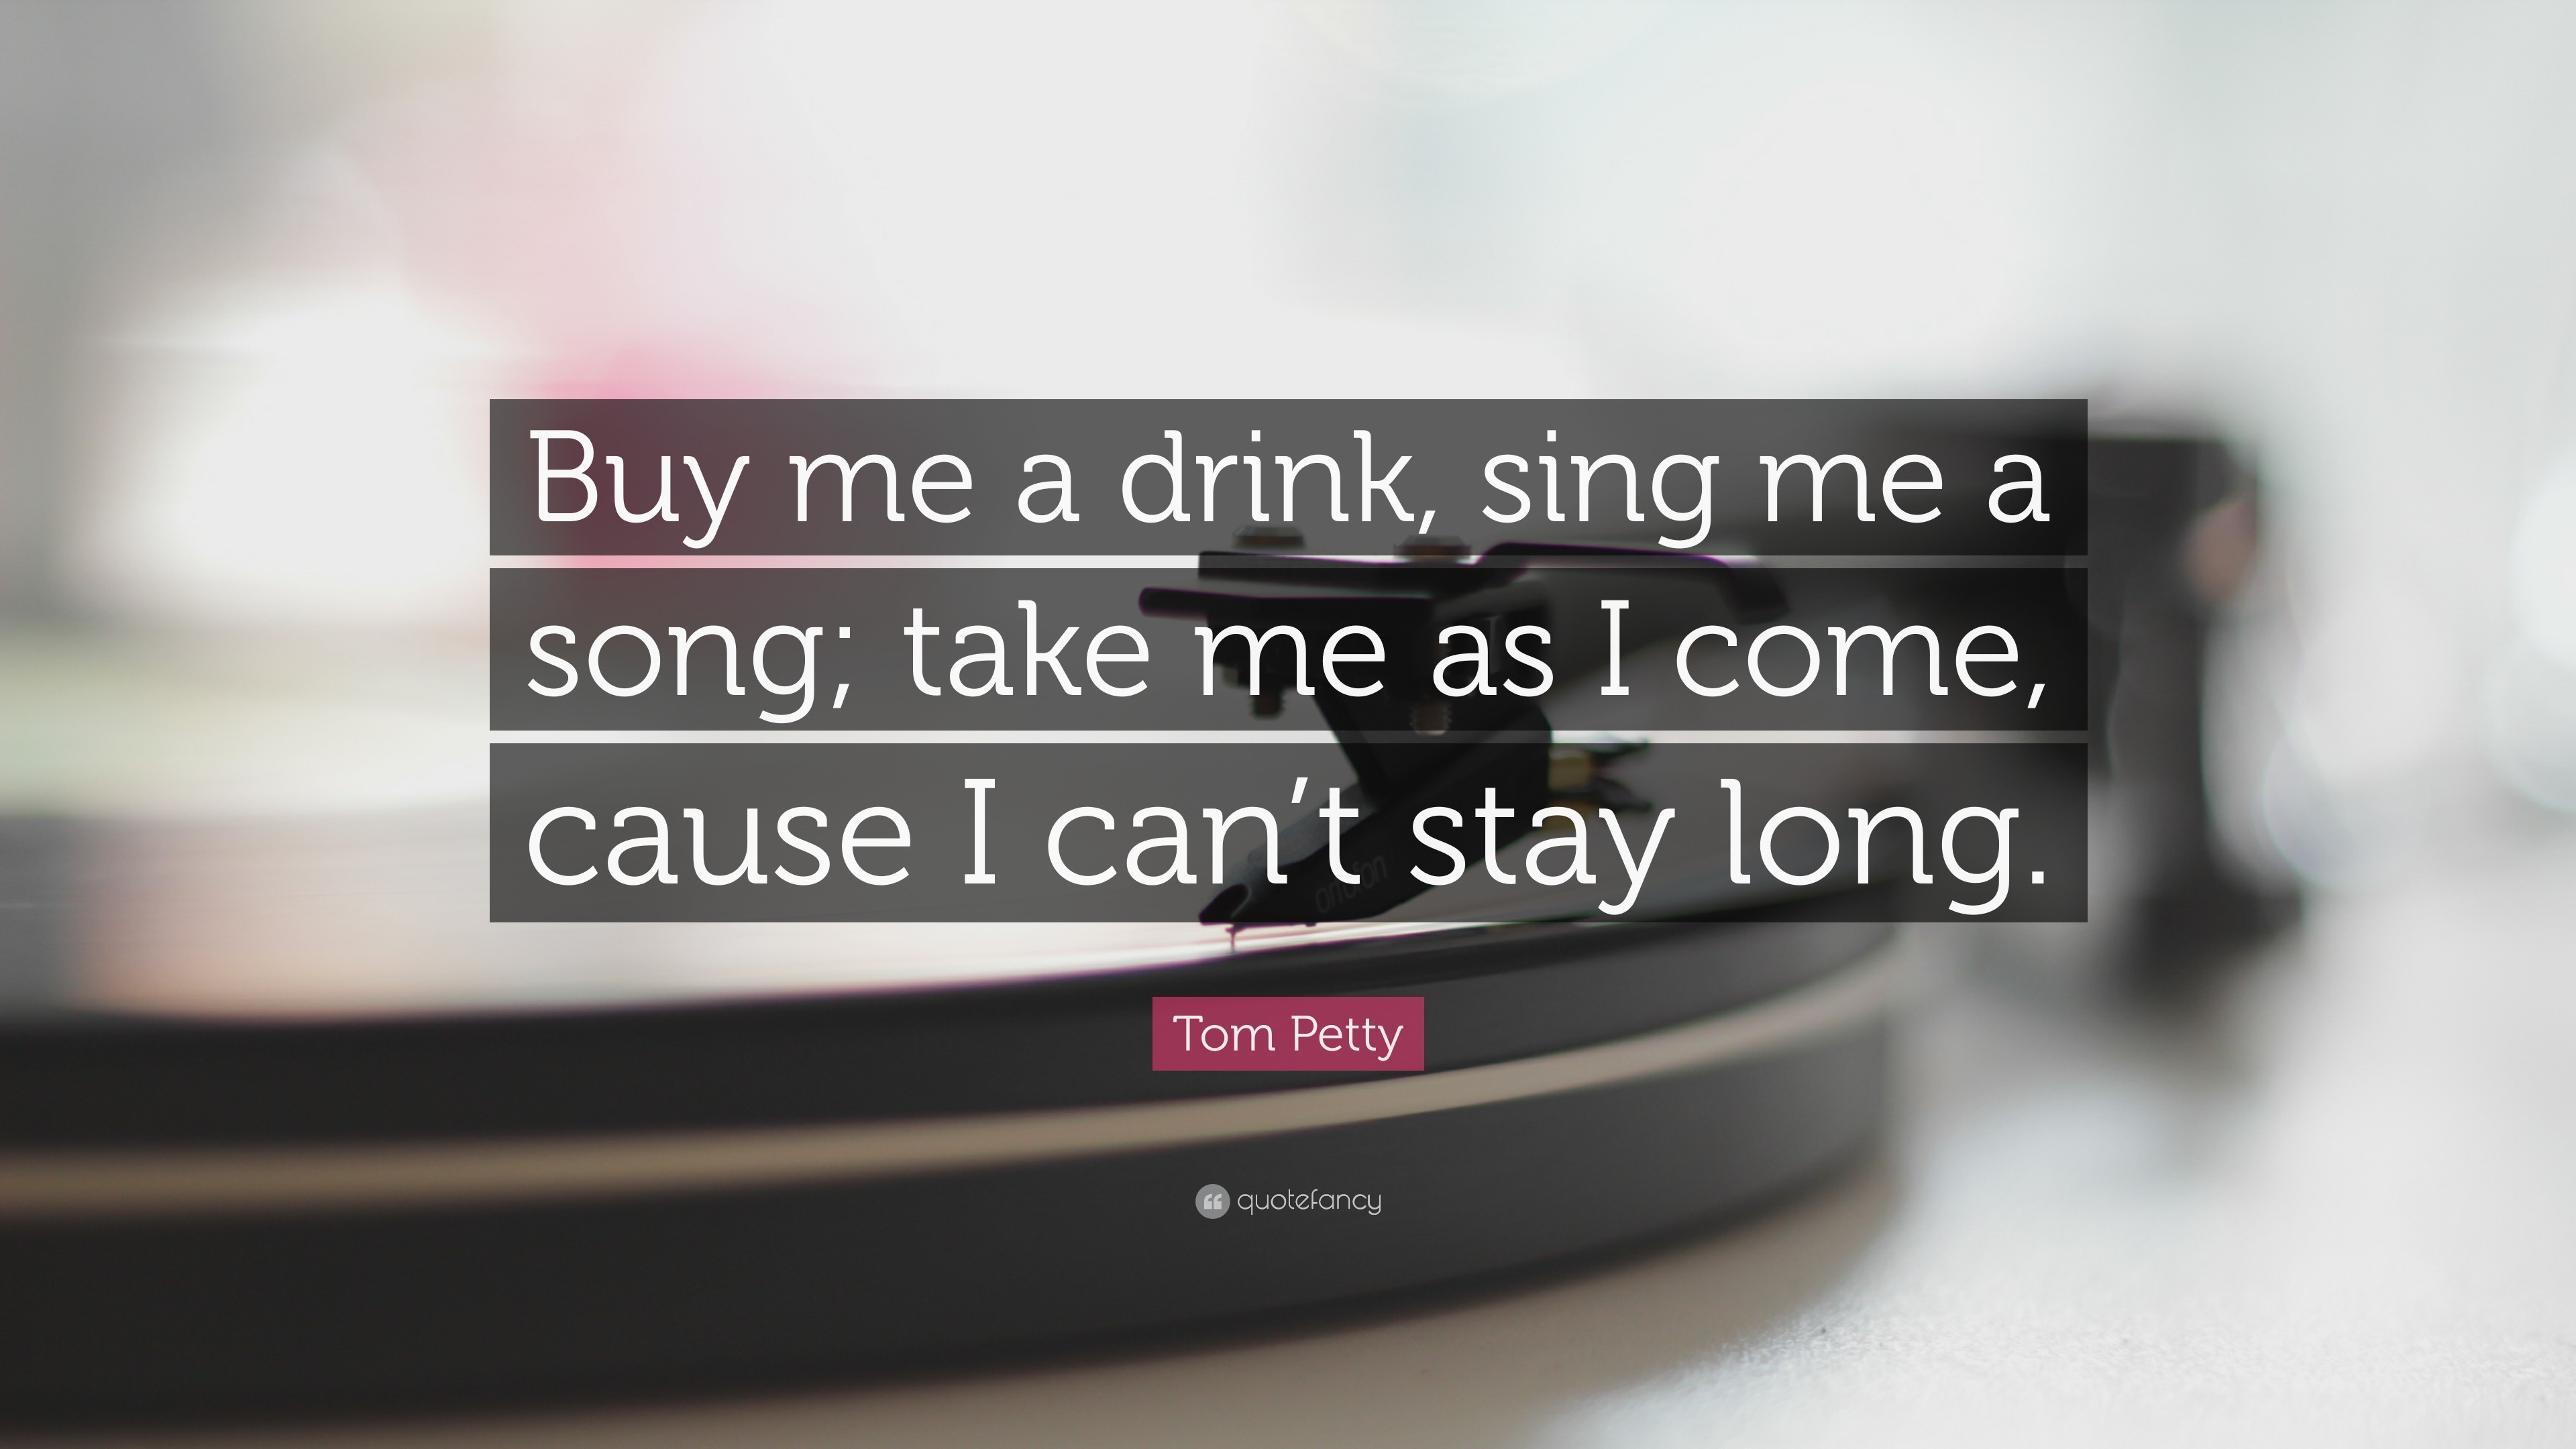 Buy me a drink, sing me a song; take me as I come, cause I can’t stay long....